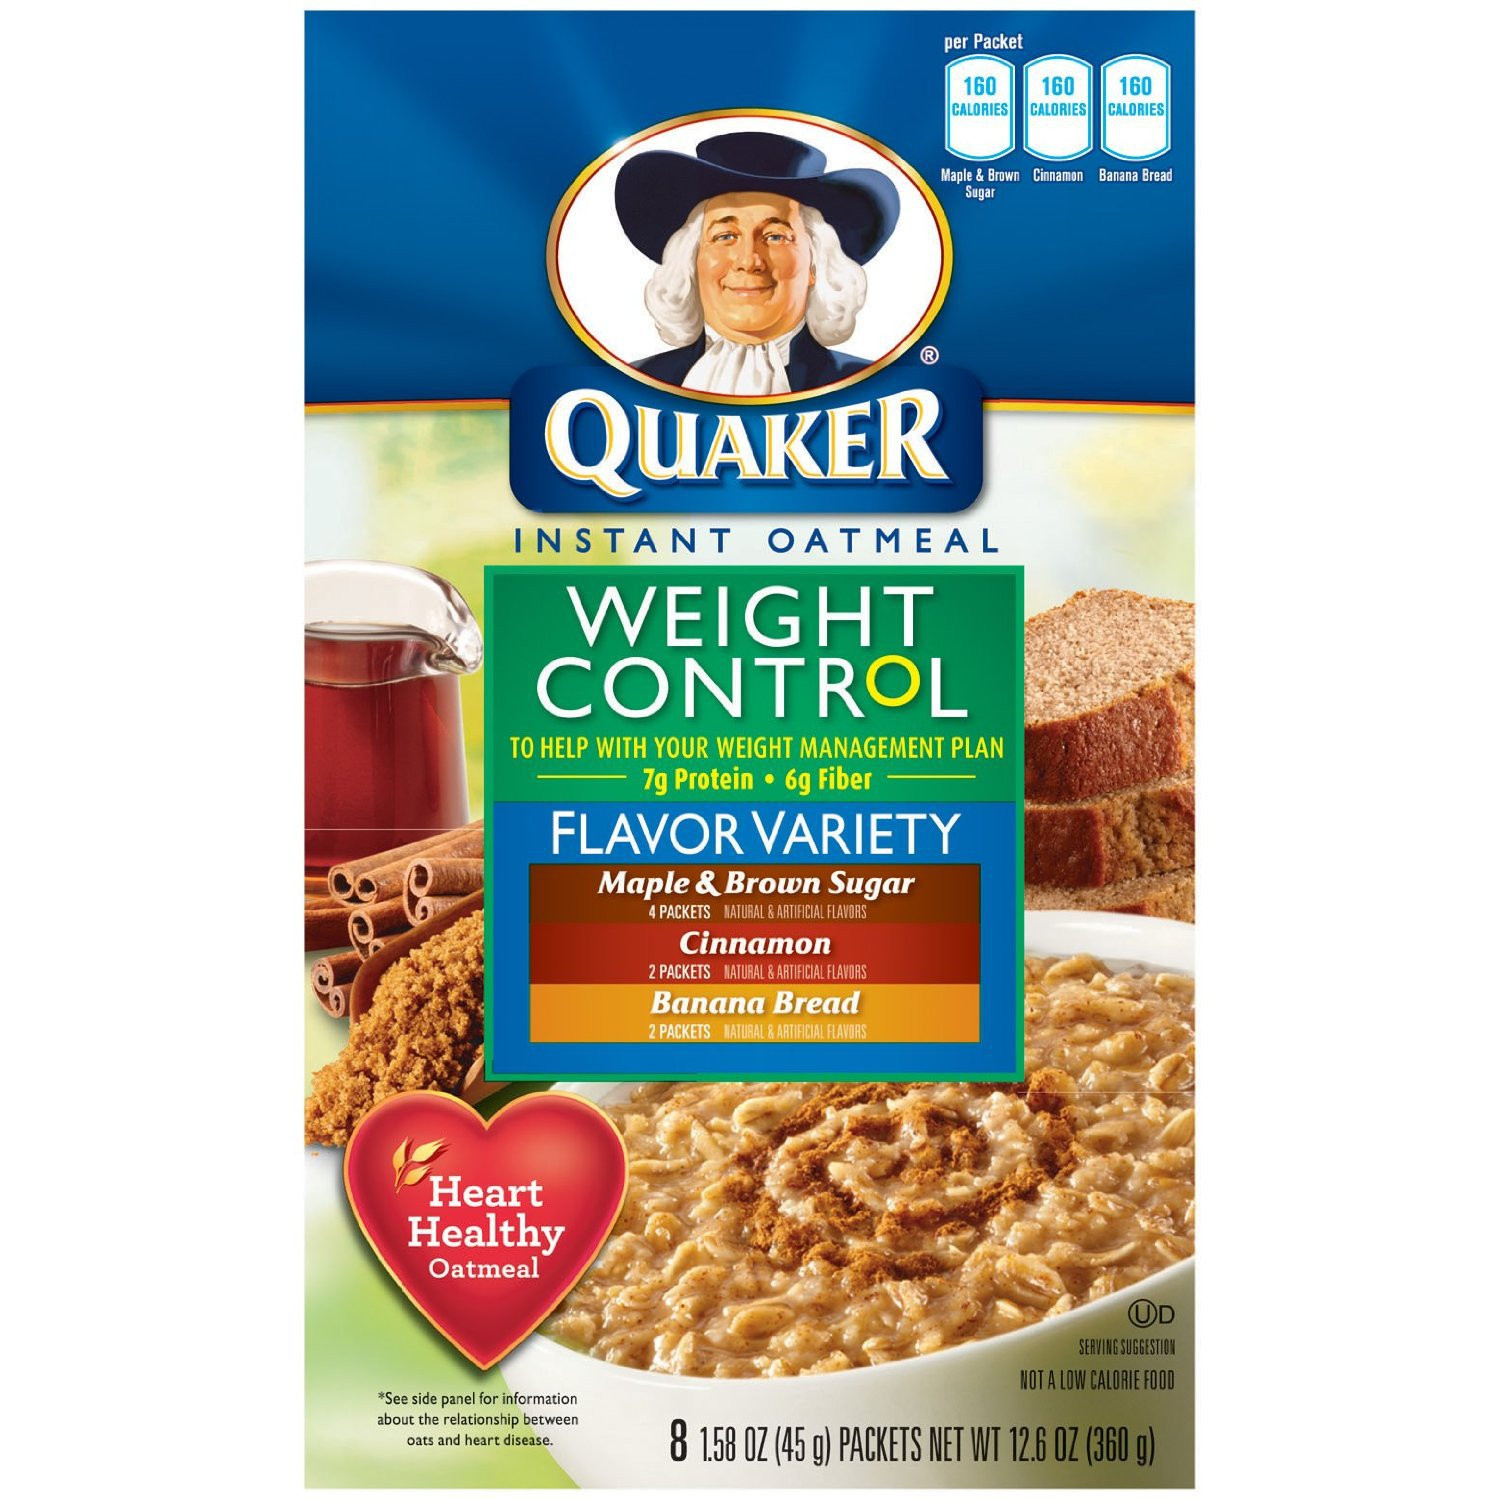 Quaker Oats Weight Loss
 Quaker Instant Oatmeal Weight Control Flavor Variety Pack